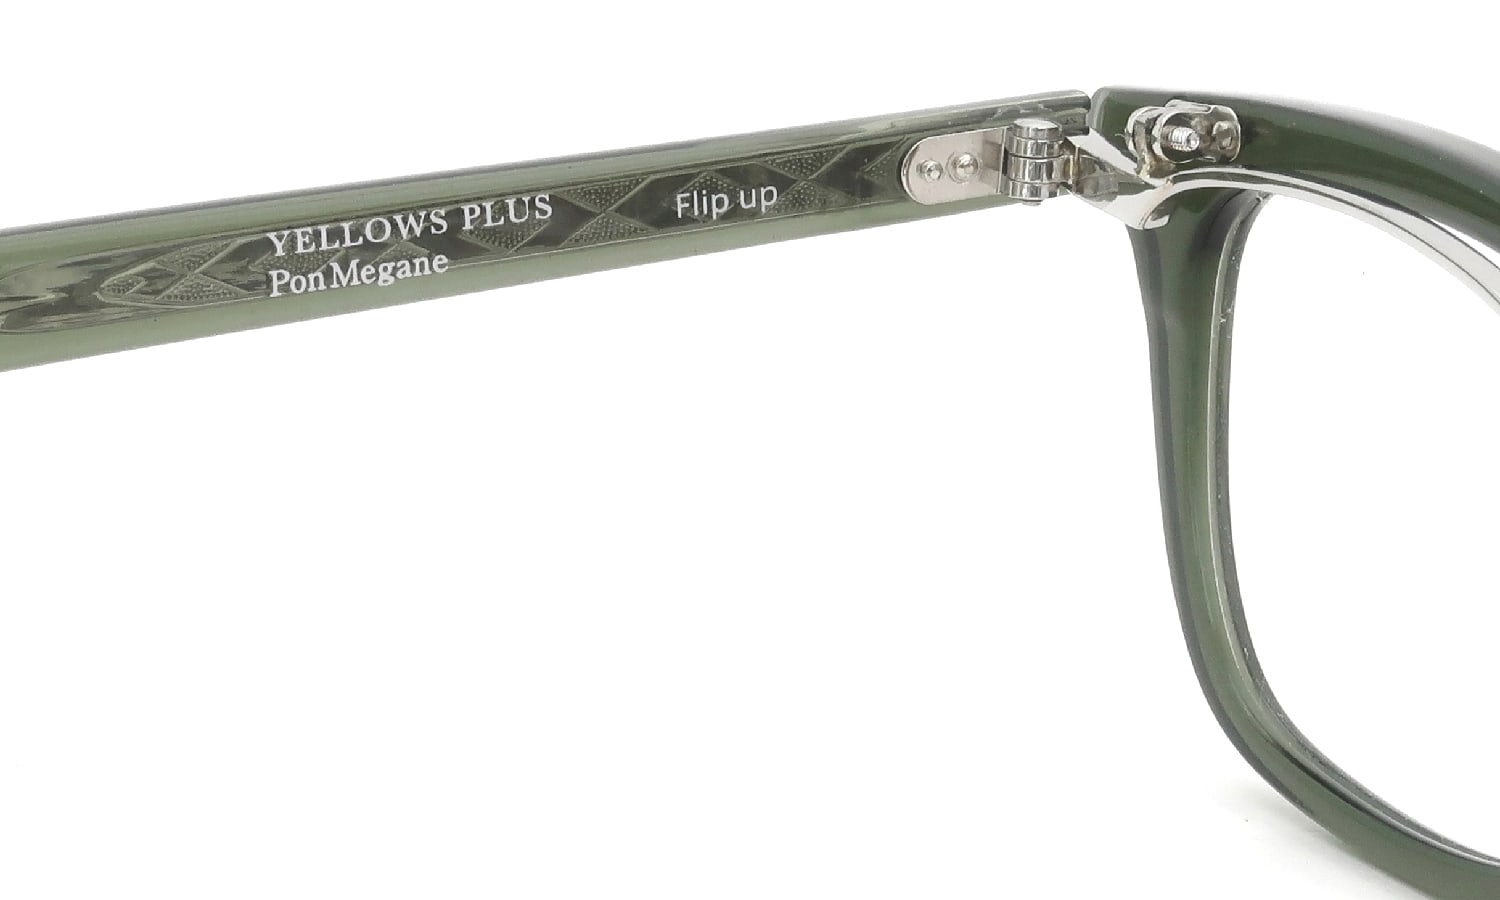 YELLOWS PLUS for PonMegane 跳ね上げ式メガネ Flip up Celluloid Olive clear